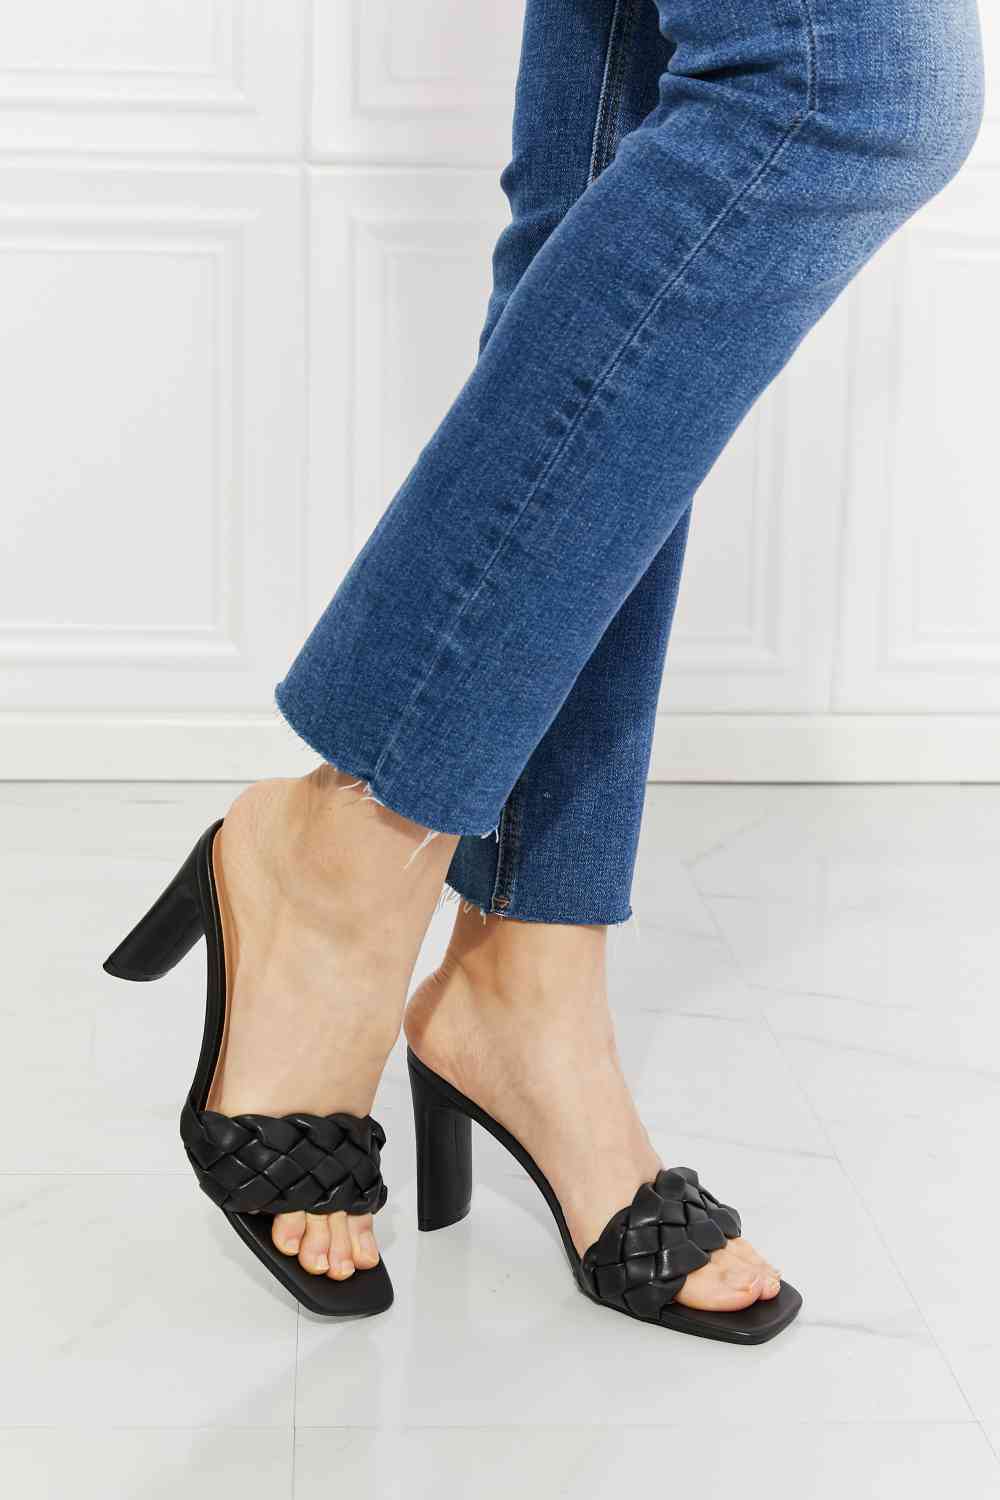 MMShoes Top of the World Braided Block Heel Sandals in Black